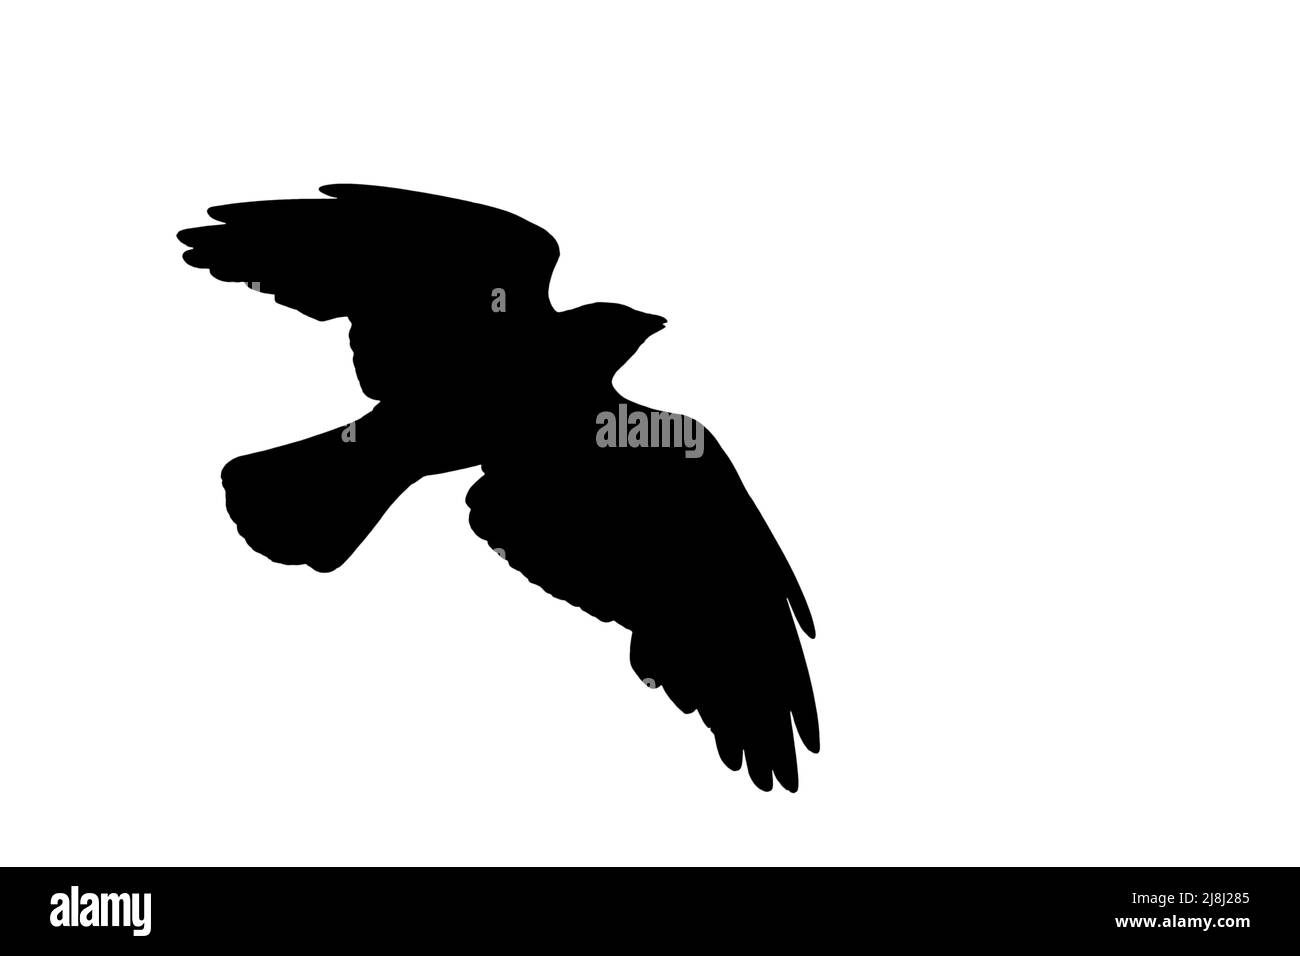 Silhouette of Western jackdaw (Corvus monedula) in flight outlined against white background to show wings, head and tail shapes Stock Photo